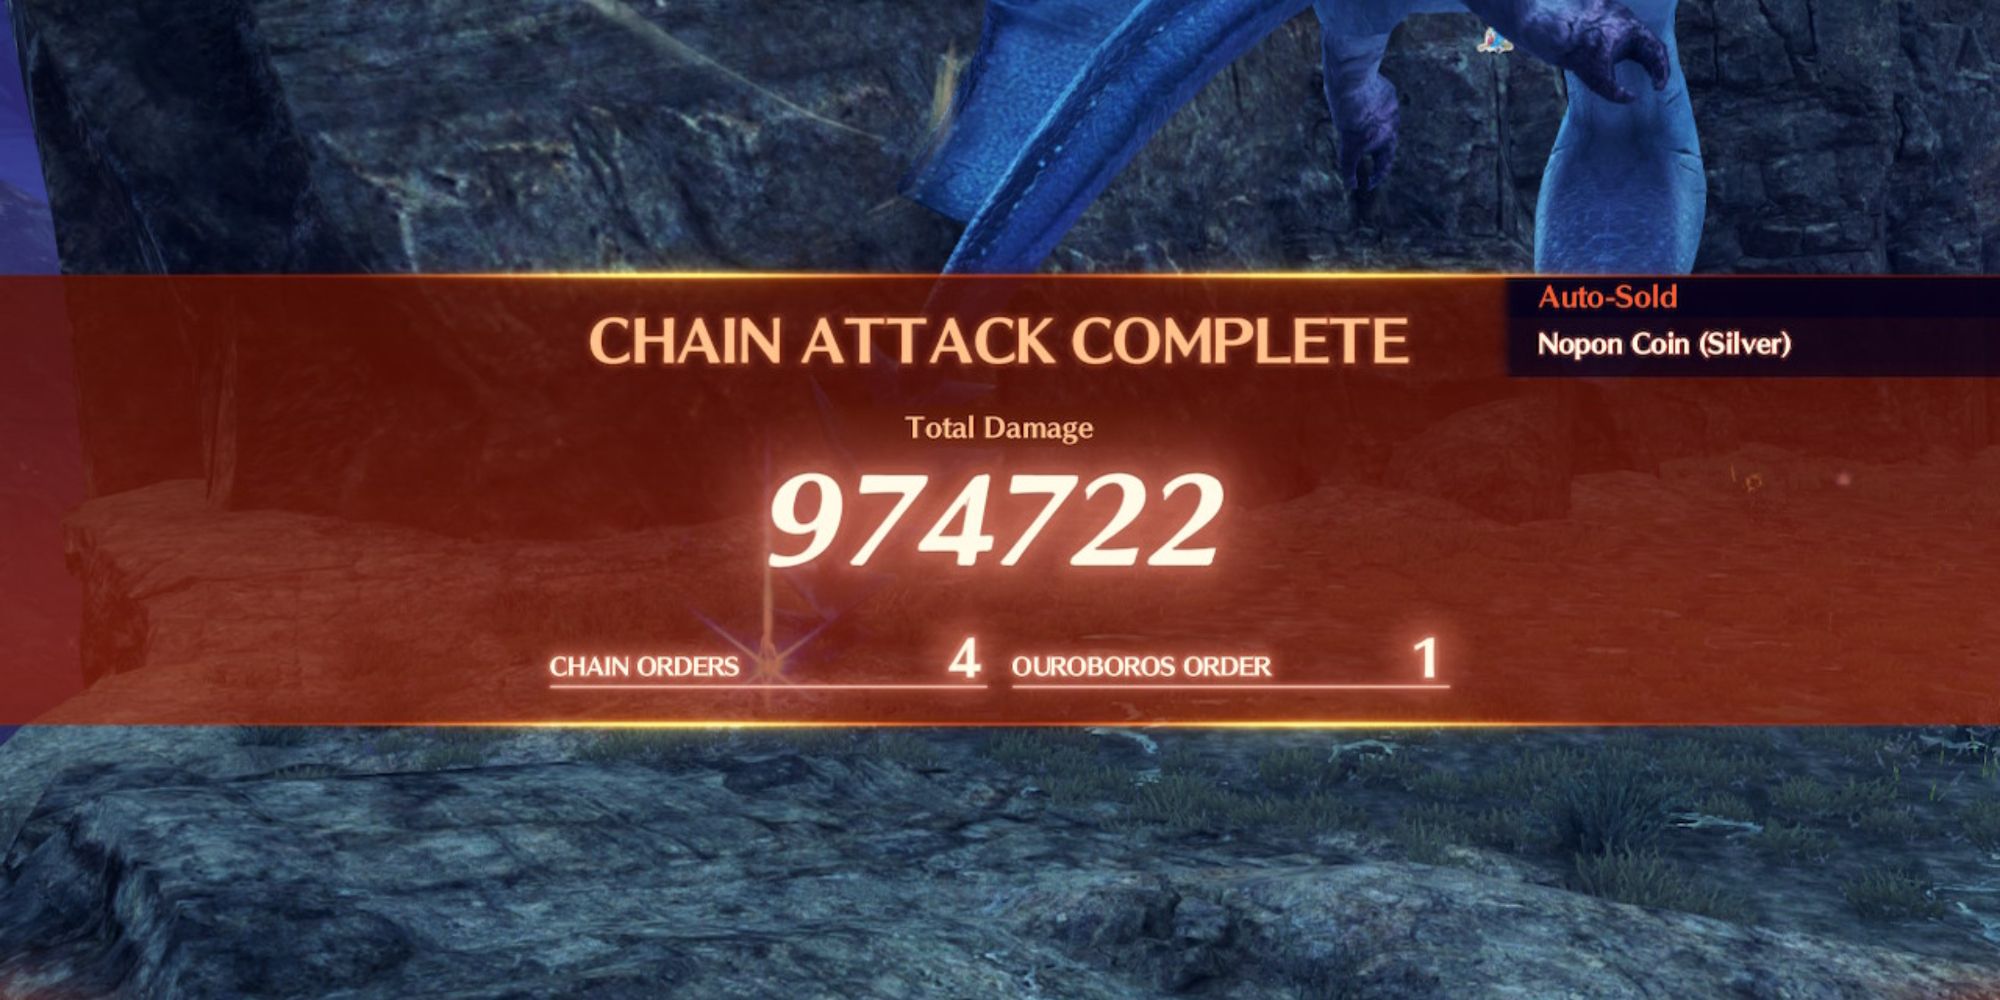 Chain Attack Completion screen, showing the total damage and Chain Orders in Xenoblade Chronicles 3